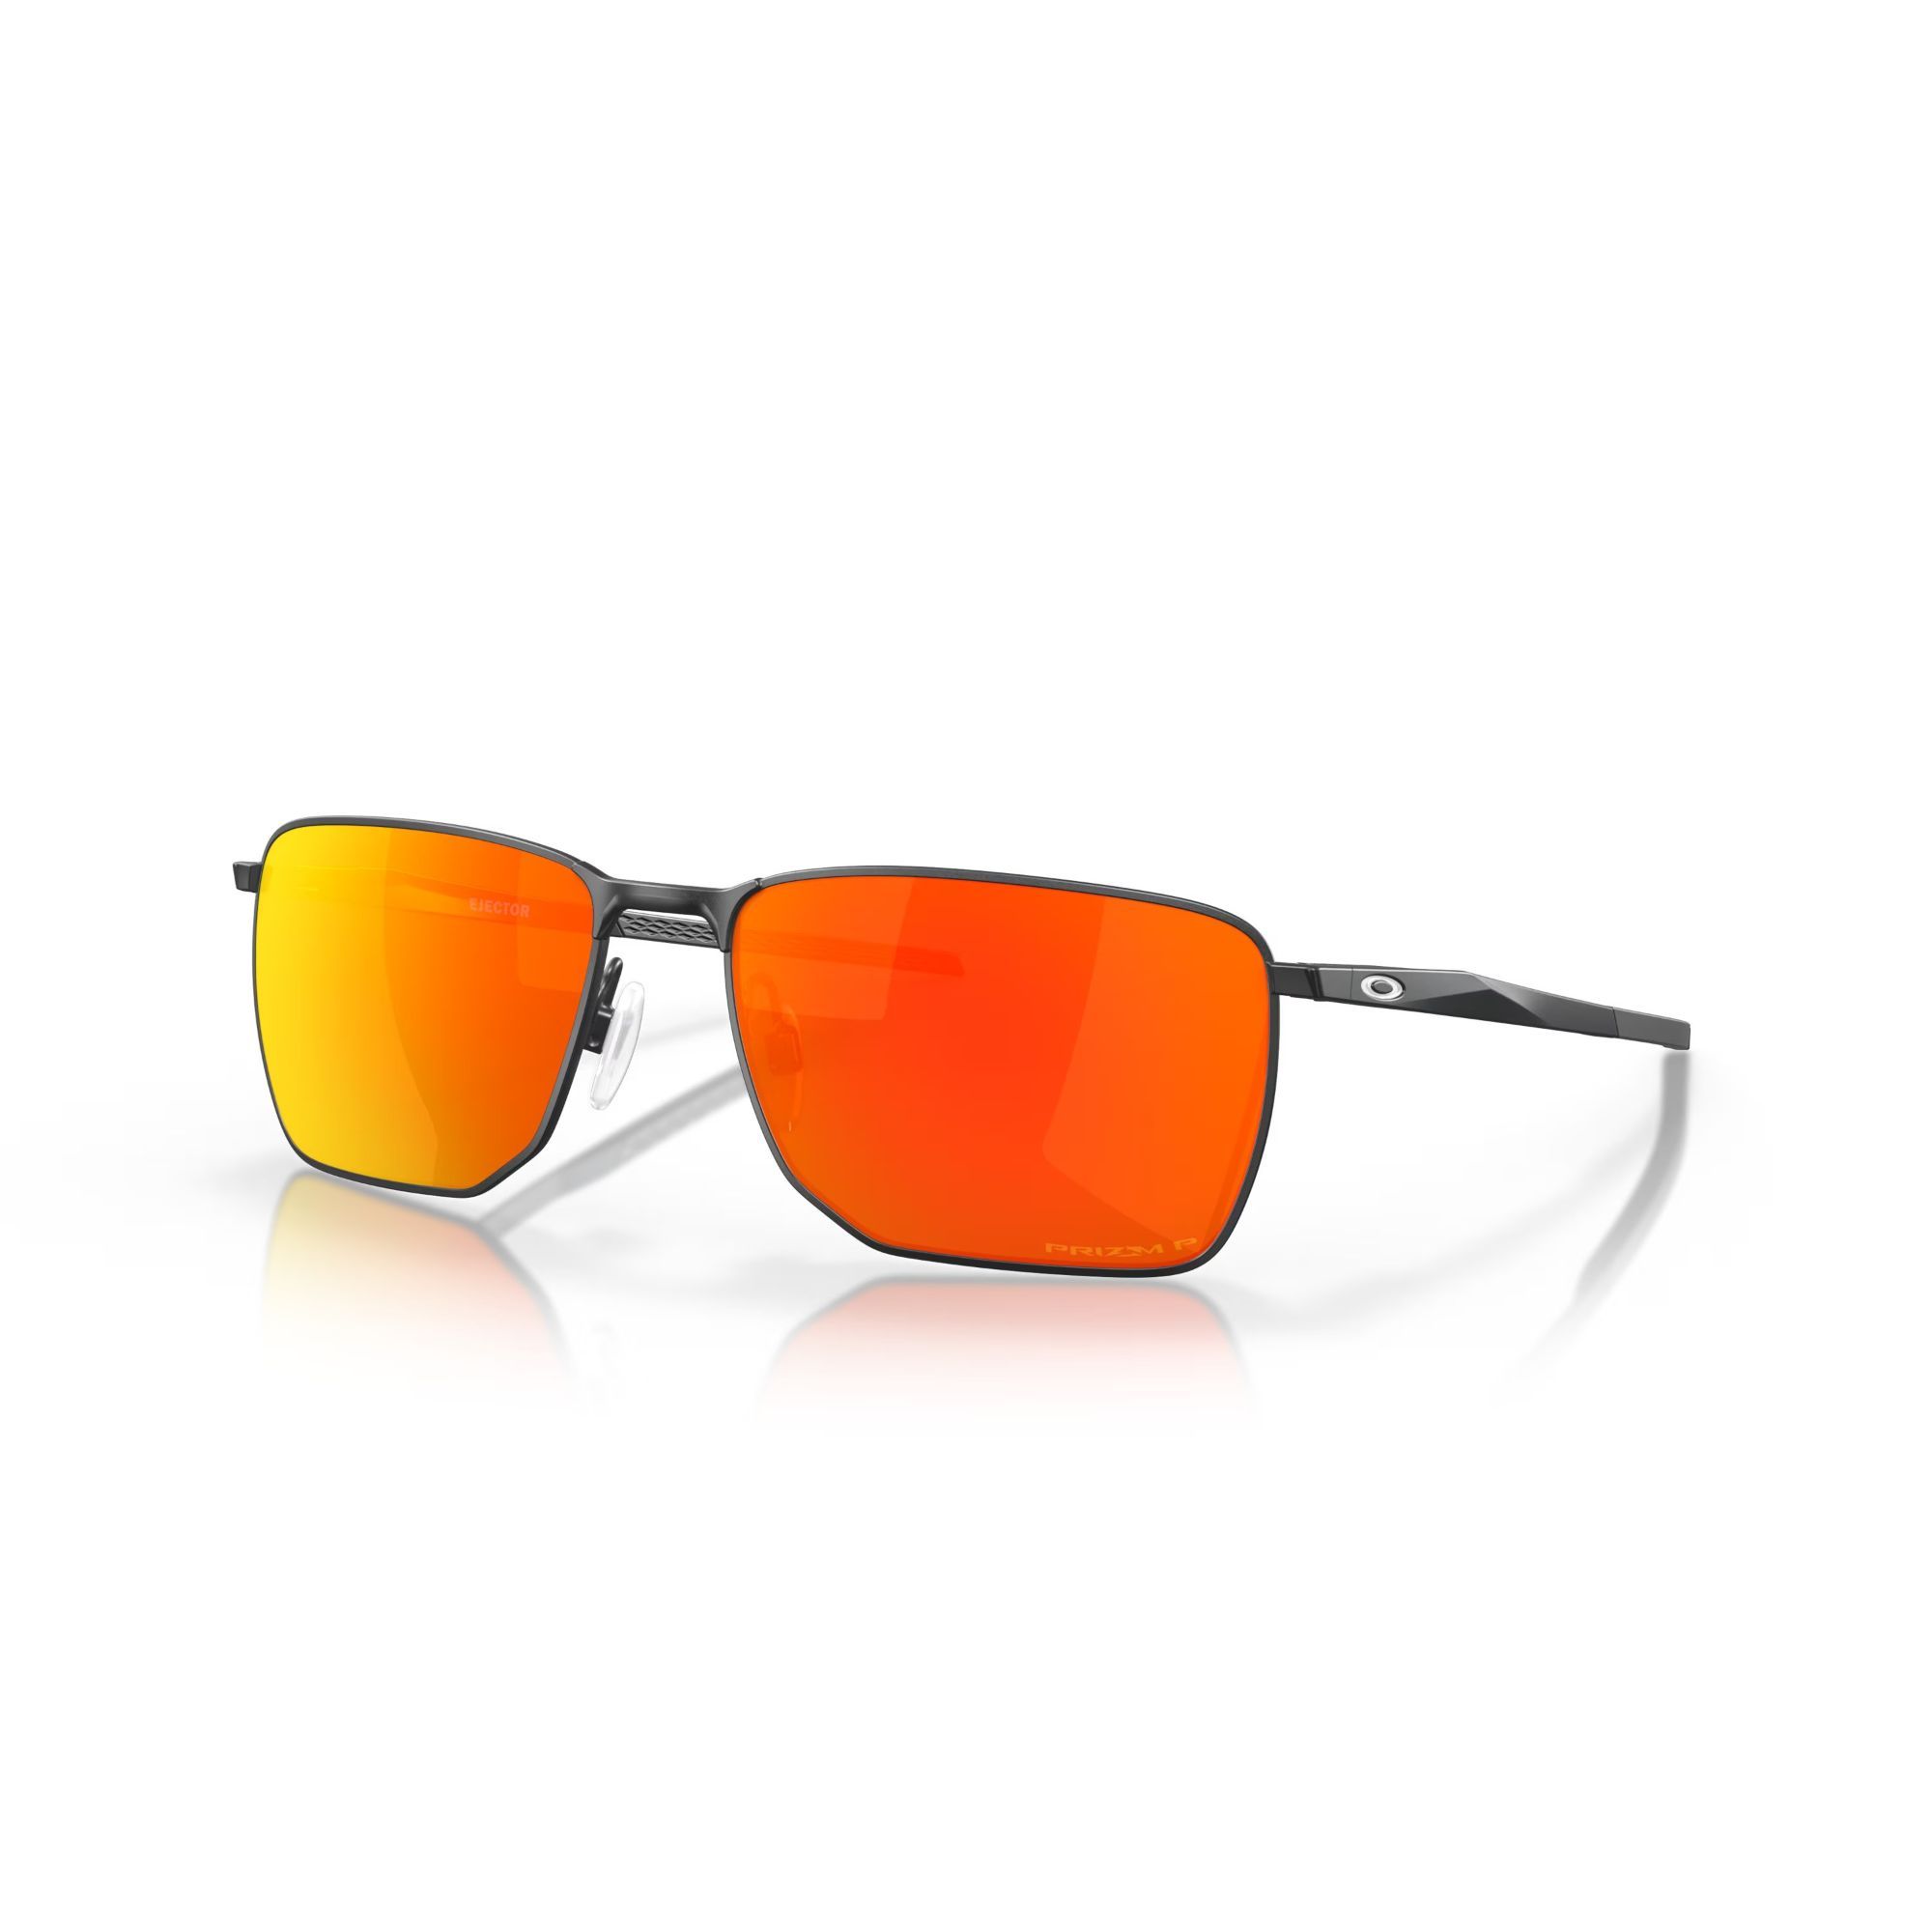 Ejector Sunglasses OO4142-15 size 58